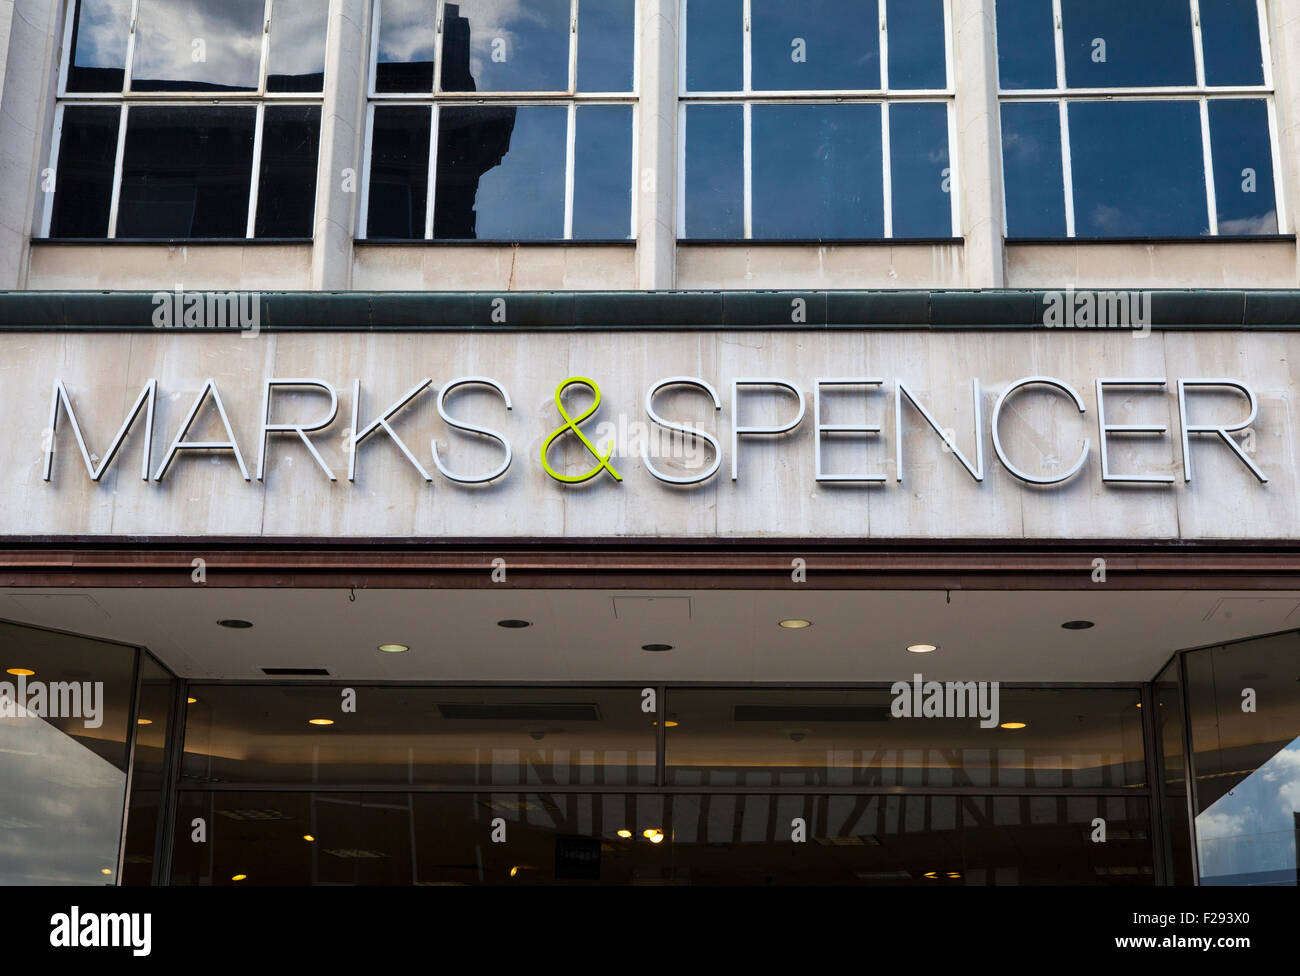 YORK, UK - AUGUST 25TH 2015: The sign for a Marks and Spencer retail store in York city centre, on 25th August 2015. Stock Photo